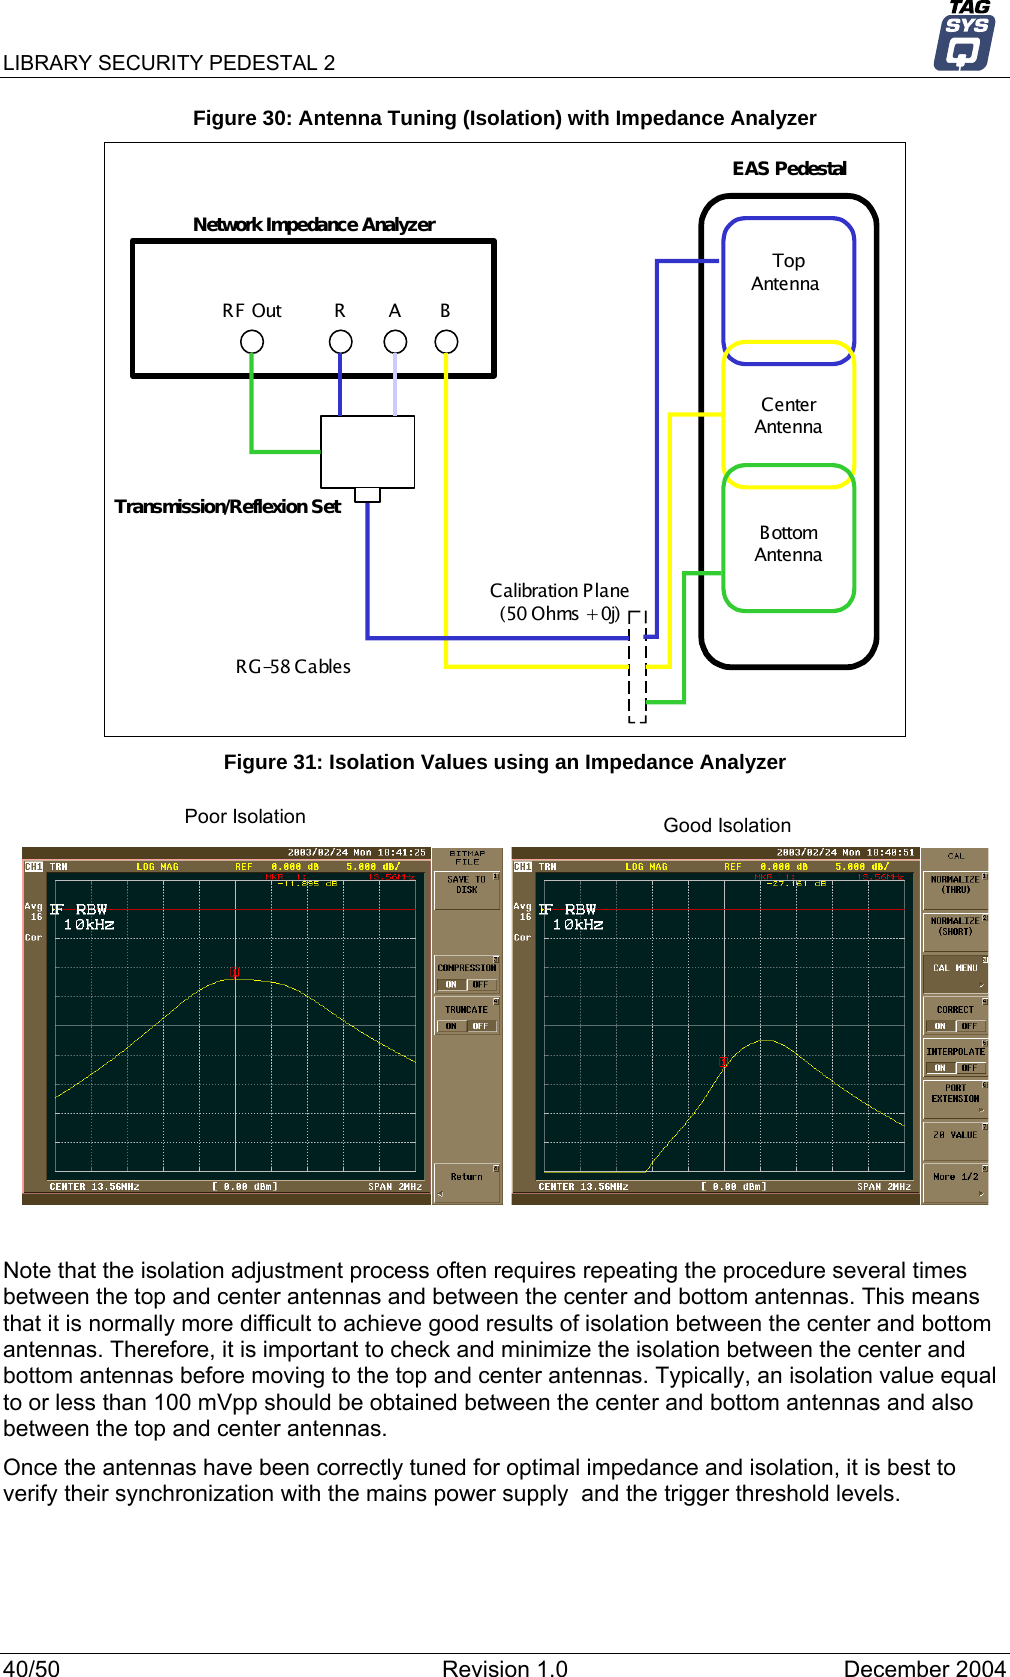 LIBRARY SECURITY PEDESTAL 2   Figure 30: Antenna Tuning (Isolation) with Impedance Analyzer EAS PedestalNetwork Impedance AnalyzerTopAntenna CenterAntennaBottomAntennaCalibration P lane(50 O hms + 0j)BARRF OutTransmission/Reflexion SetRG-58 Cables Figure 31: Isolation Values using an Impedance Analyzer Poor Isolation Good Isolation  Note that the isolation adjustment process often requires repeating the procedure several times between the top and center antennas and between the center and bottom antennas. This means that it is normally more difficult to achieve good results of isolation between the center and bottom antennas. Therefore, it is important to check and minimize the isolation between the center and bottom antennas before moving to the top and center antennas. Typically, an isolation value equal to or less than 100 mVpp should be obtained between the center and bottom antennas and also between the top and center antennas. Once the antennas have been correctly tuned for optimal impedance and isolation, it is best to verify their synchronization with the mains power supply  and the trigger threshold levels.  40/50  Revision 1.0  December 2004 